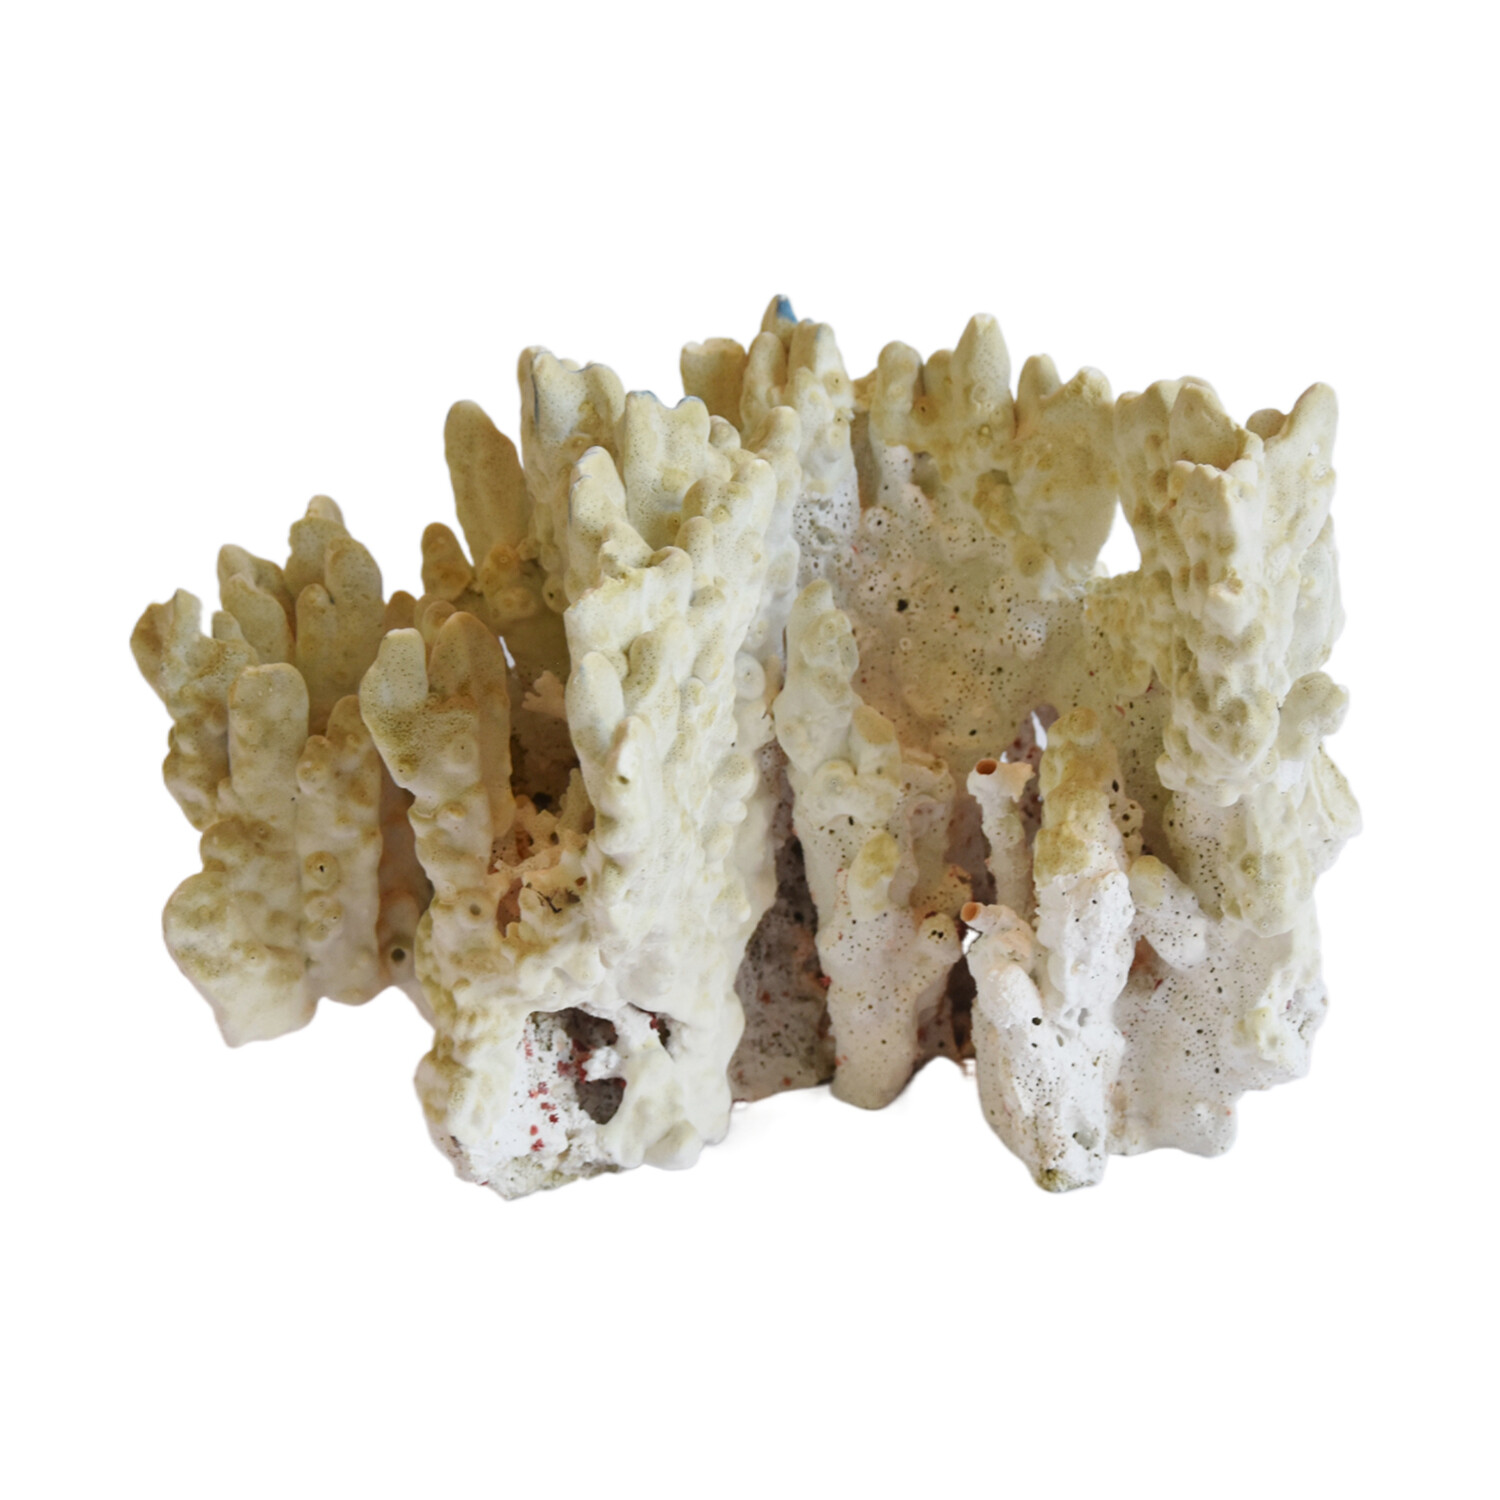 Nautical Natural Green Coral Specimen - Prized Pig by Mike Seratt